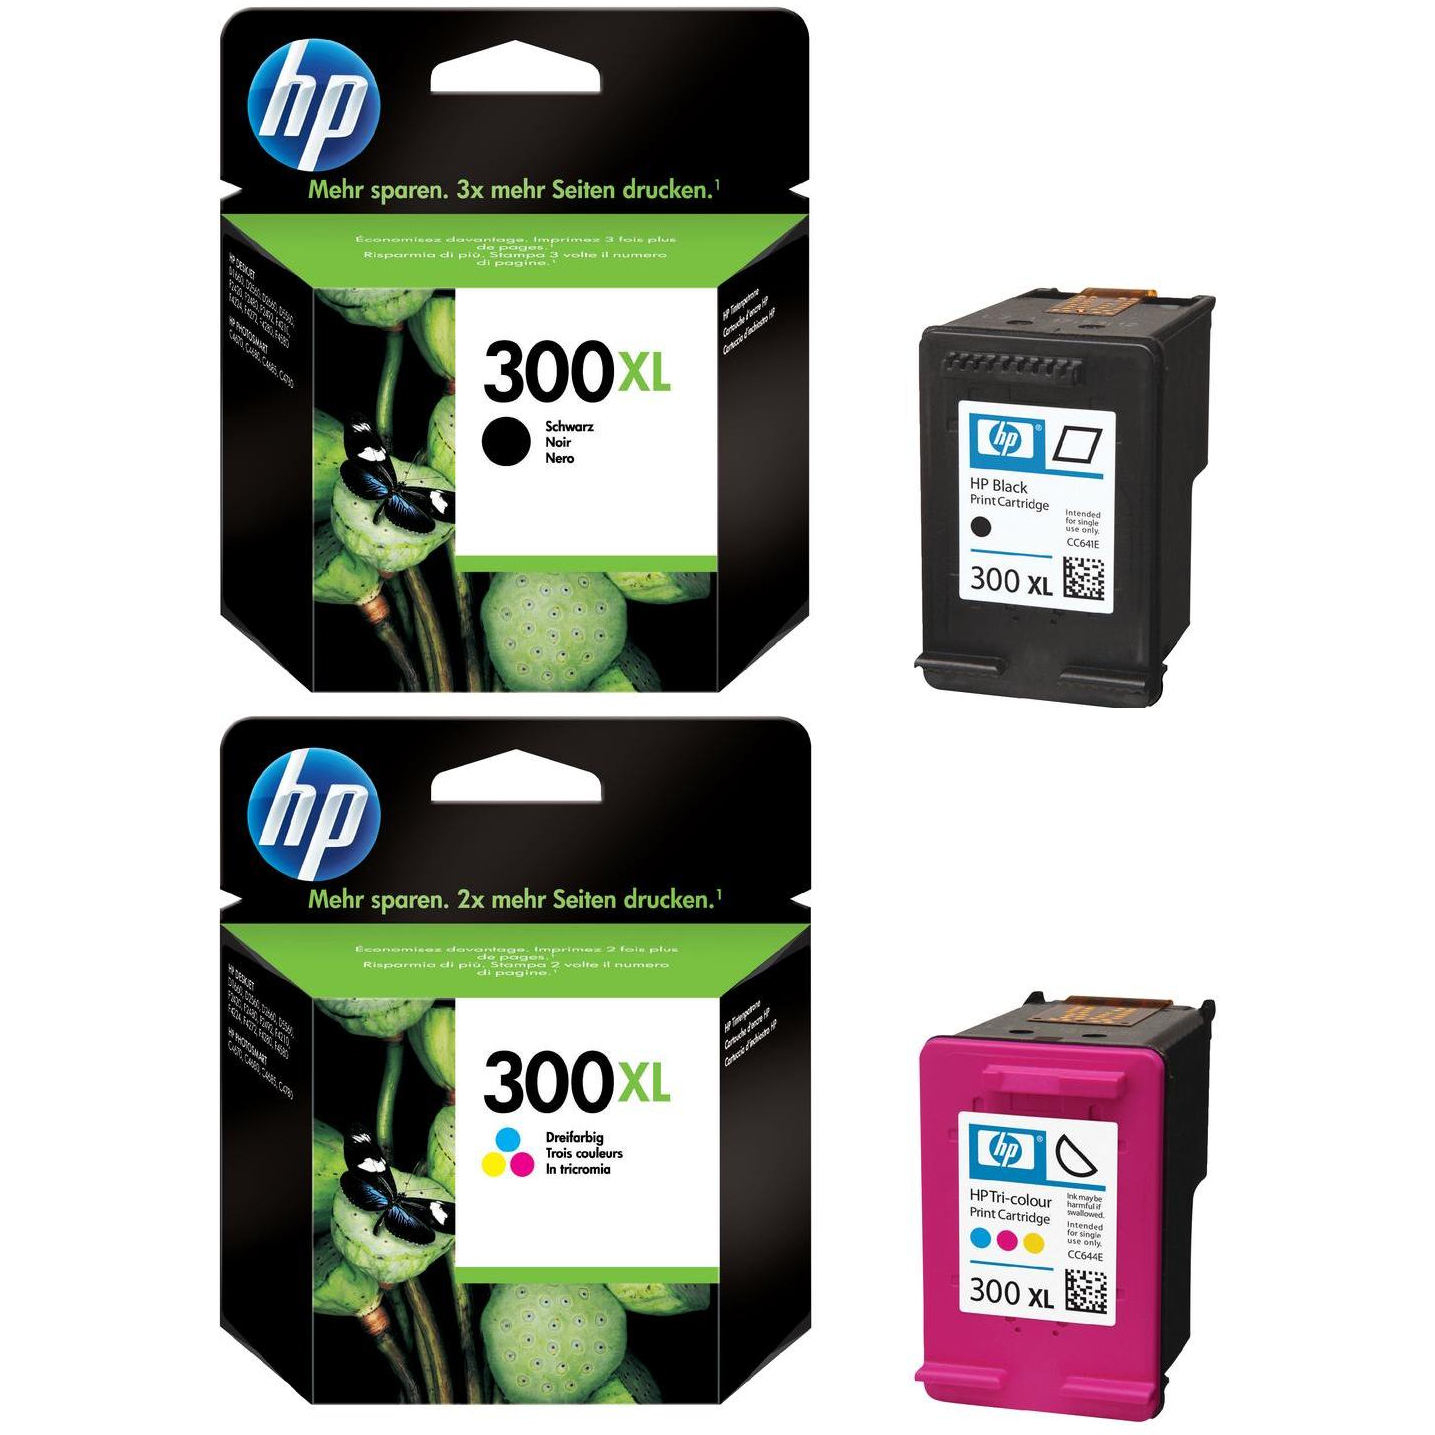 Related to HP DESKJET 420: HP-300XL-Pack